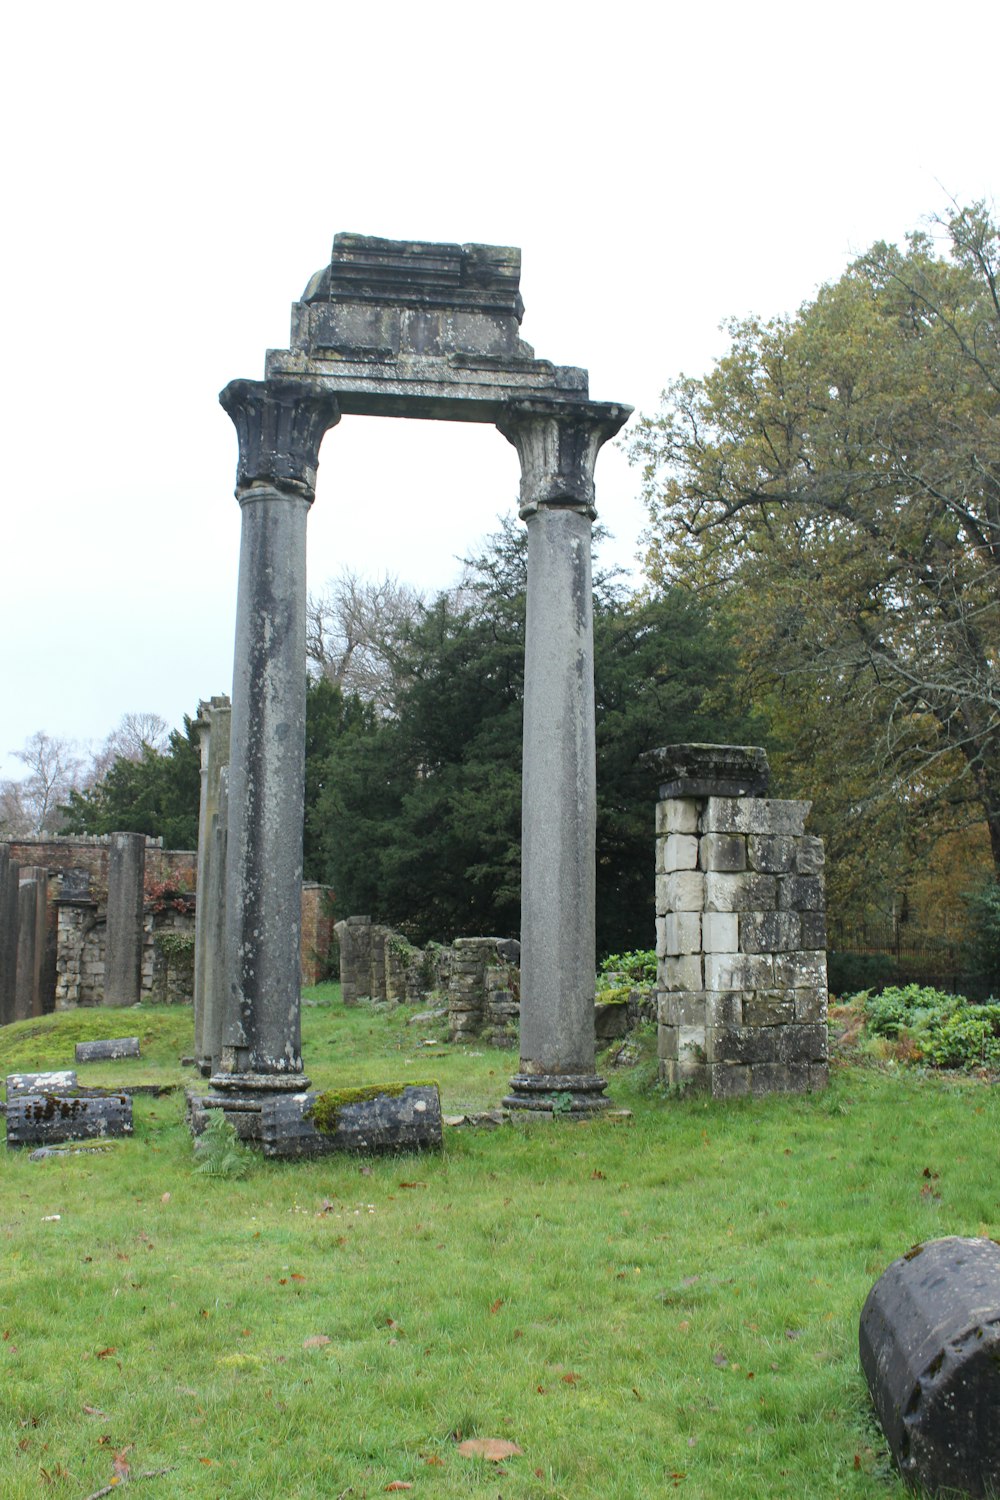 a stone arch with columns in a grassy area